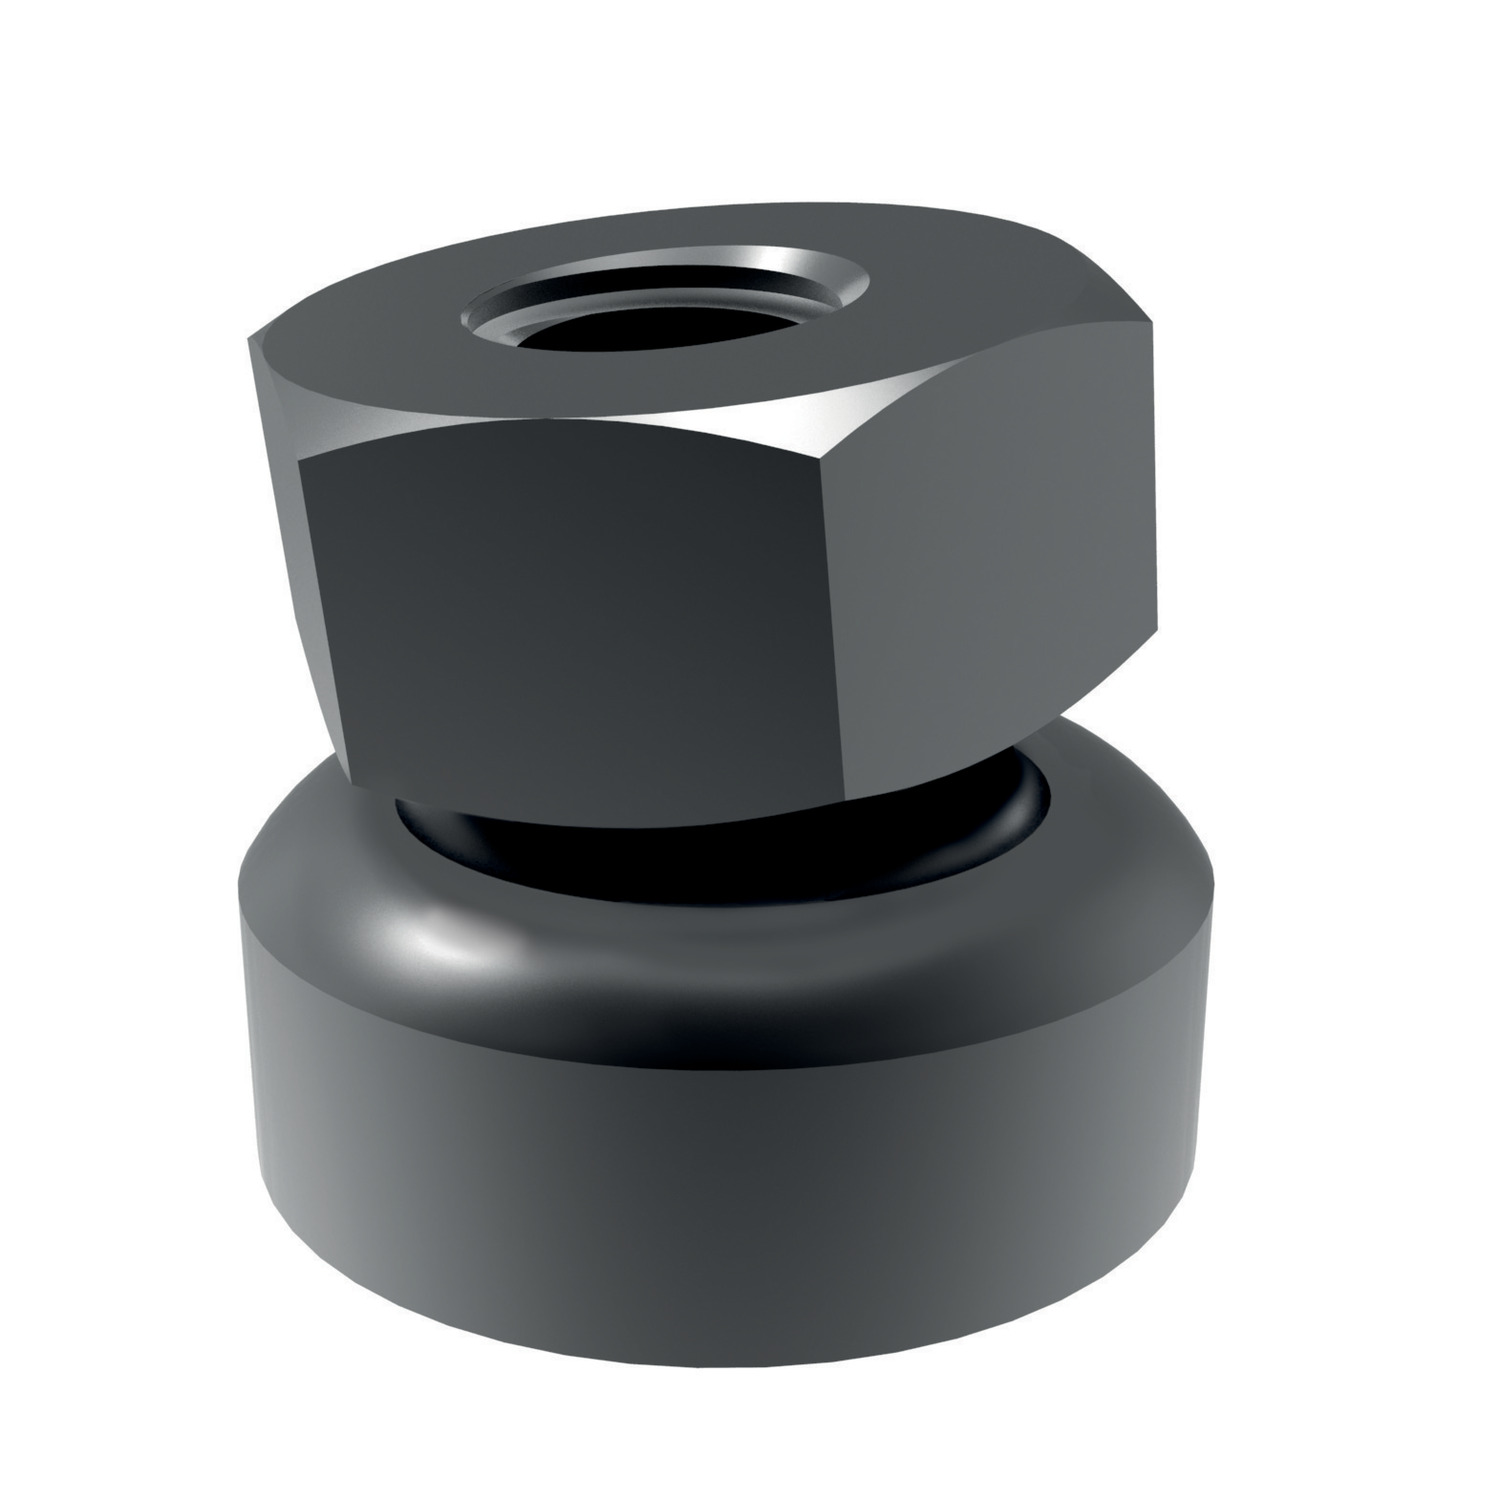 Product 24620, Swivel Nuts conical seat / 